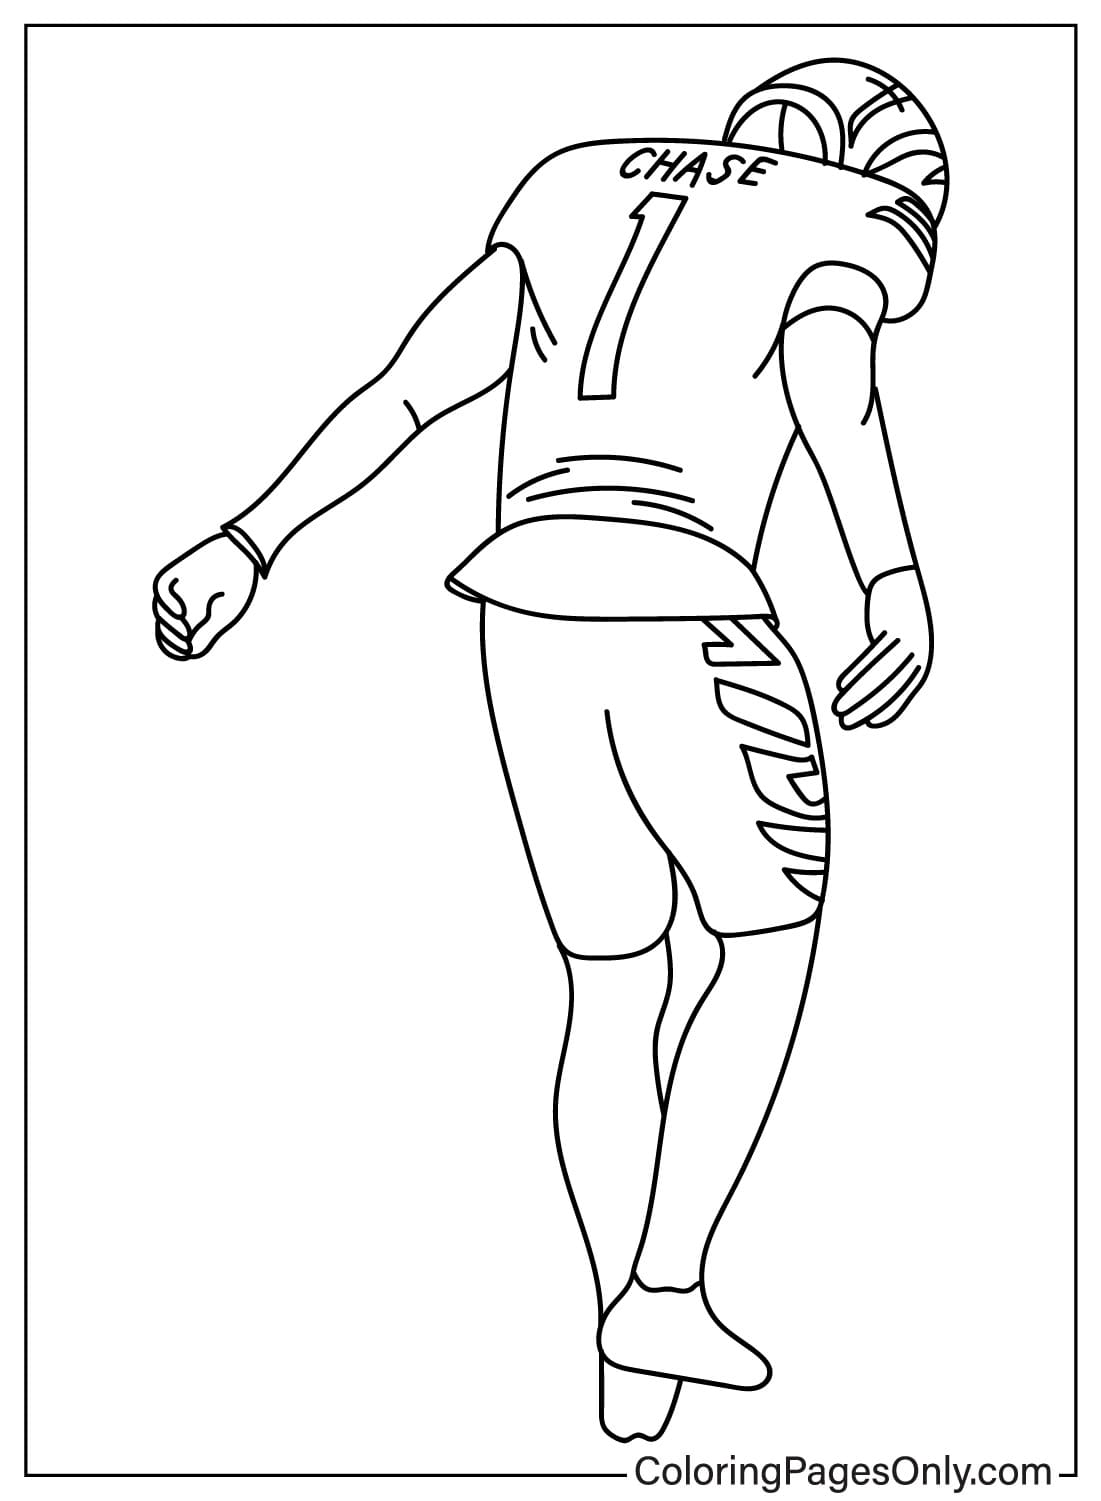 Ja’Marr Chase Coloring Page from Cincinnati Bengals